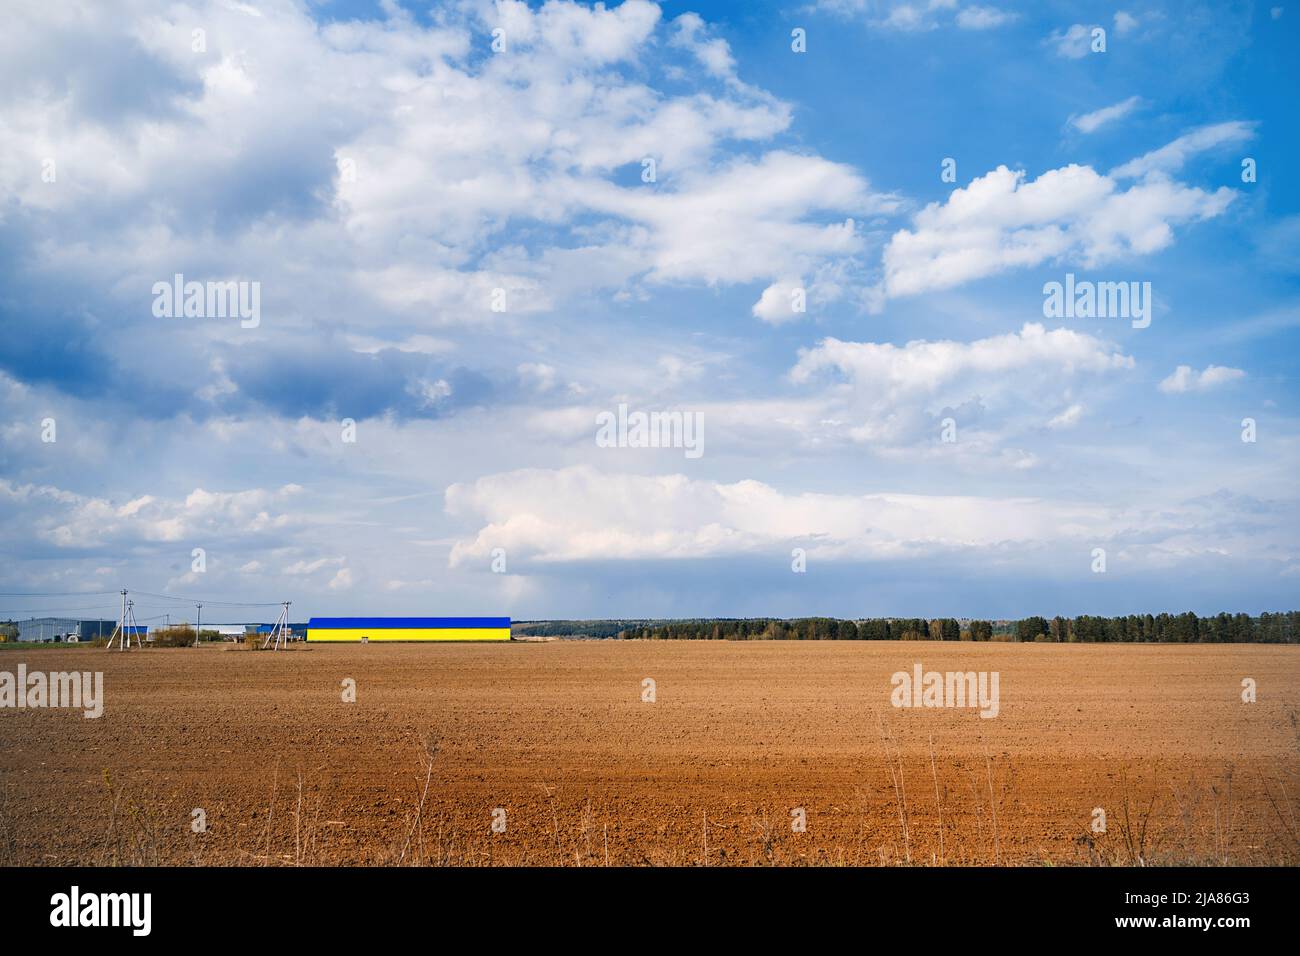 on arable land field a large hangar of yellow blue color Stock Photo